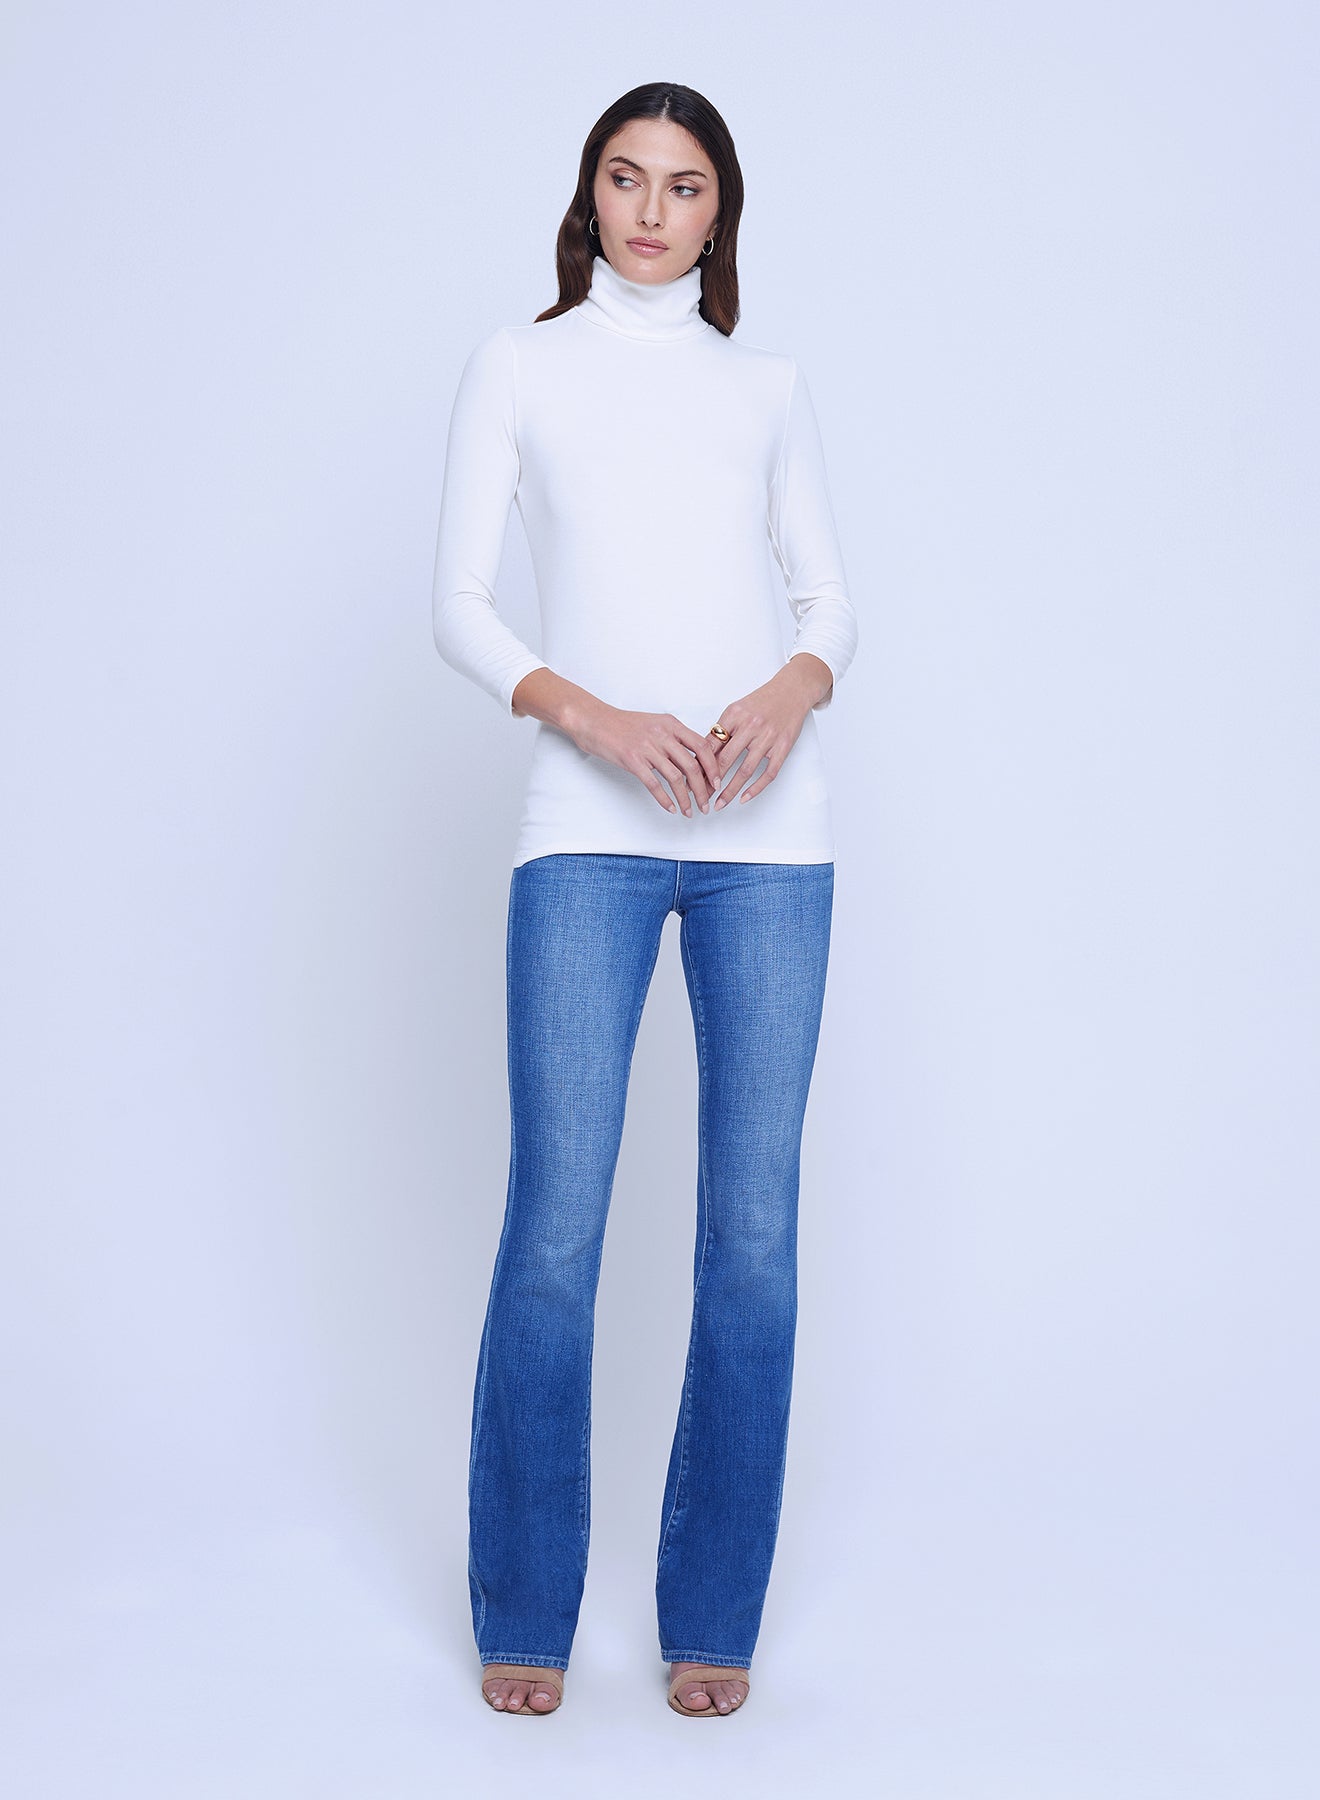 Aja Turtle Neck 3/4" Sleeve by L'agence